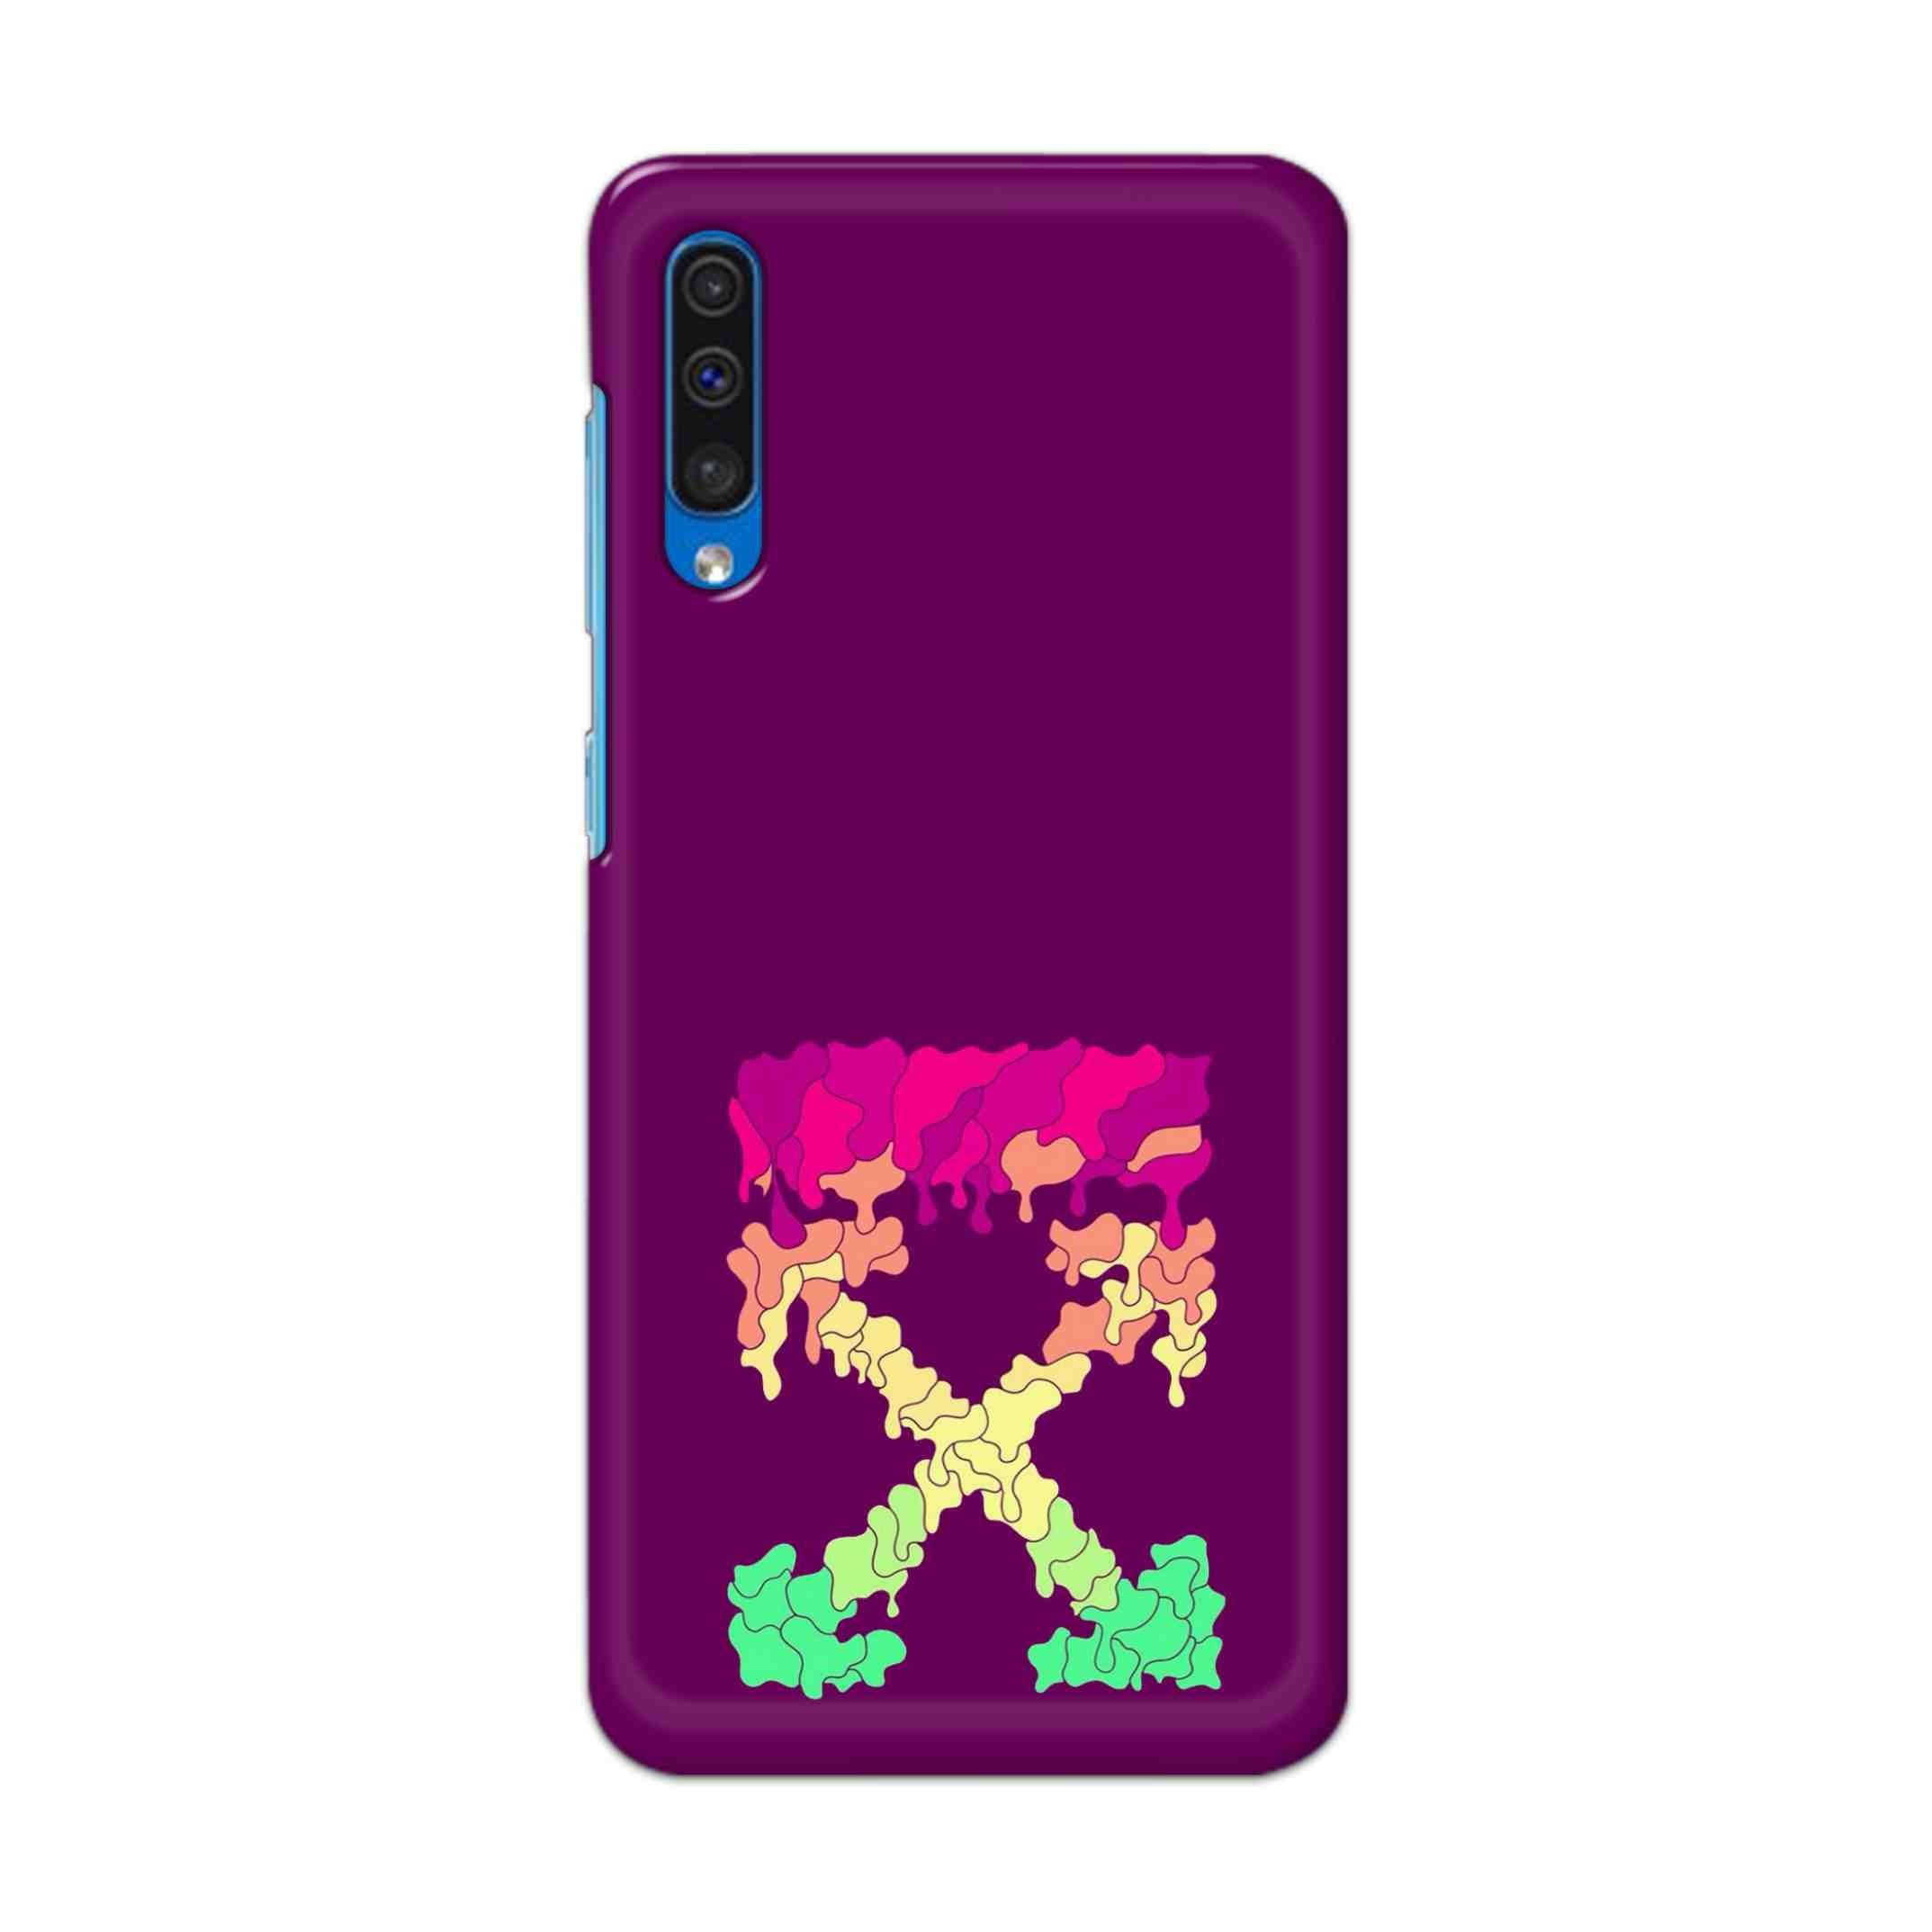 Buy X.O Hard Back Mobile Phone Case Cover For Samsung Galaxy A50 / A50s / A30s Online